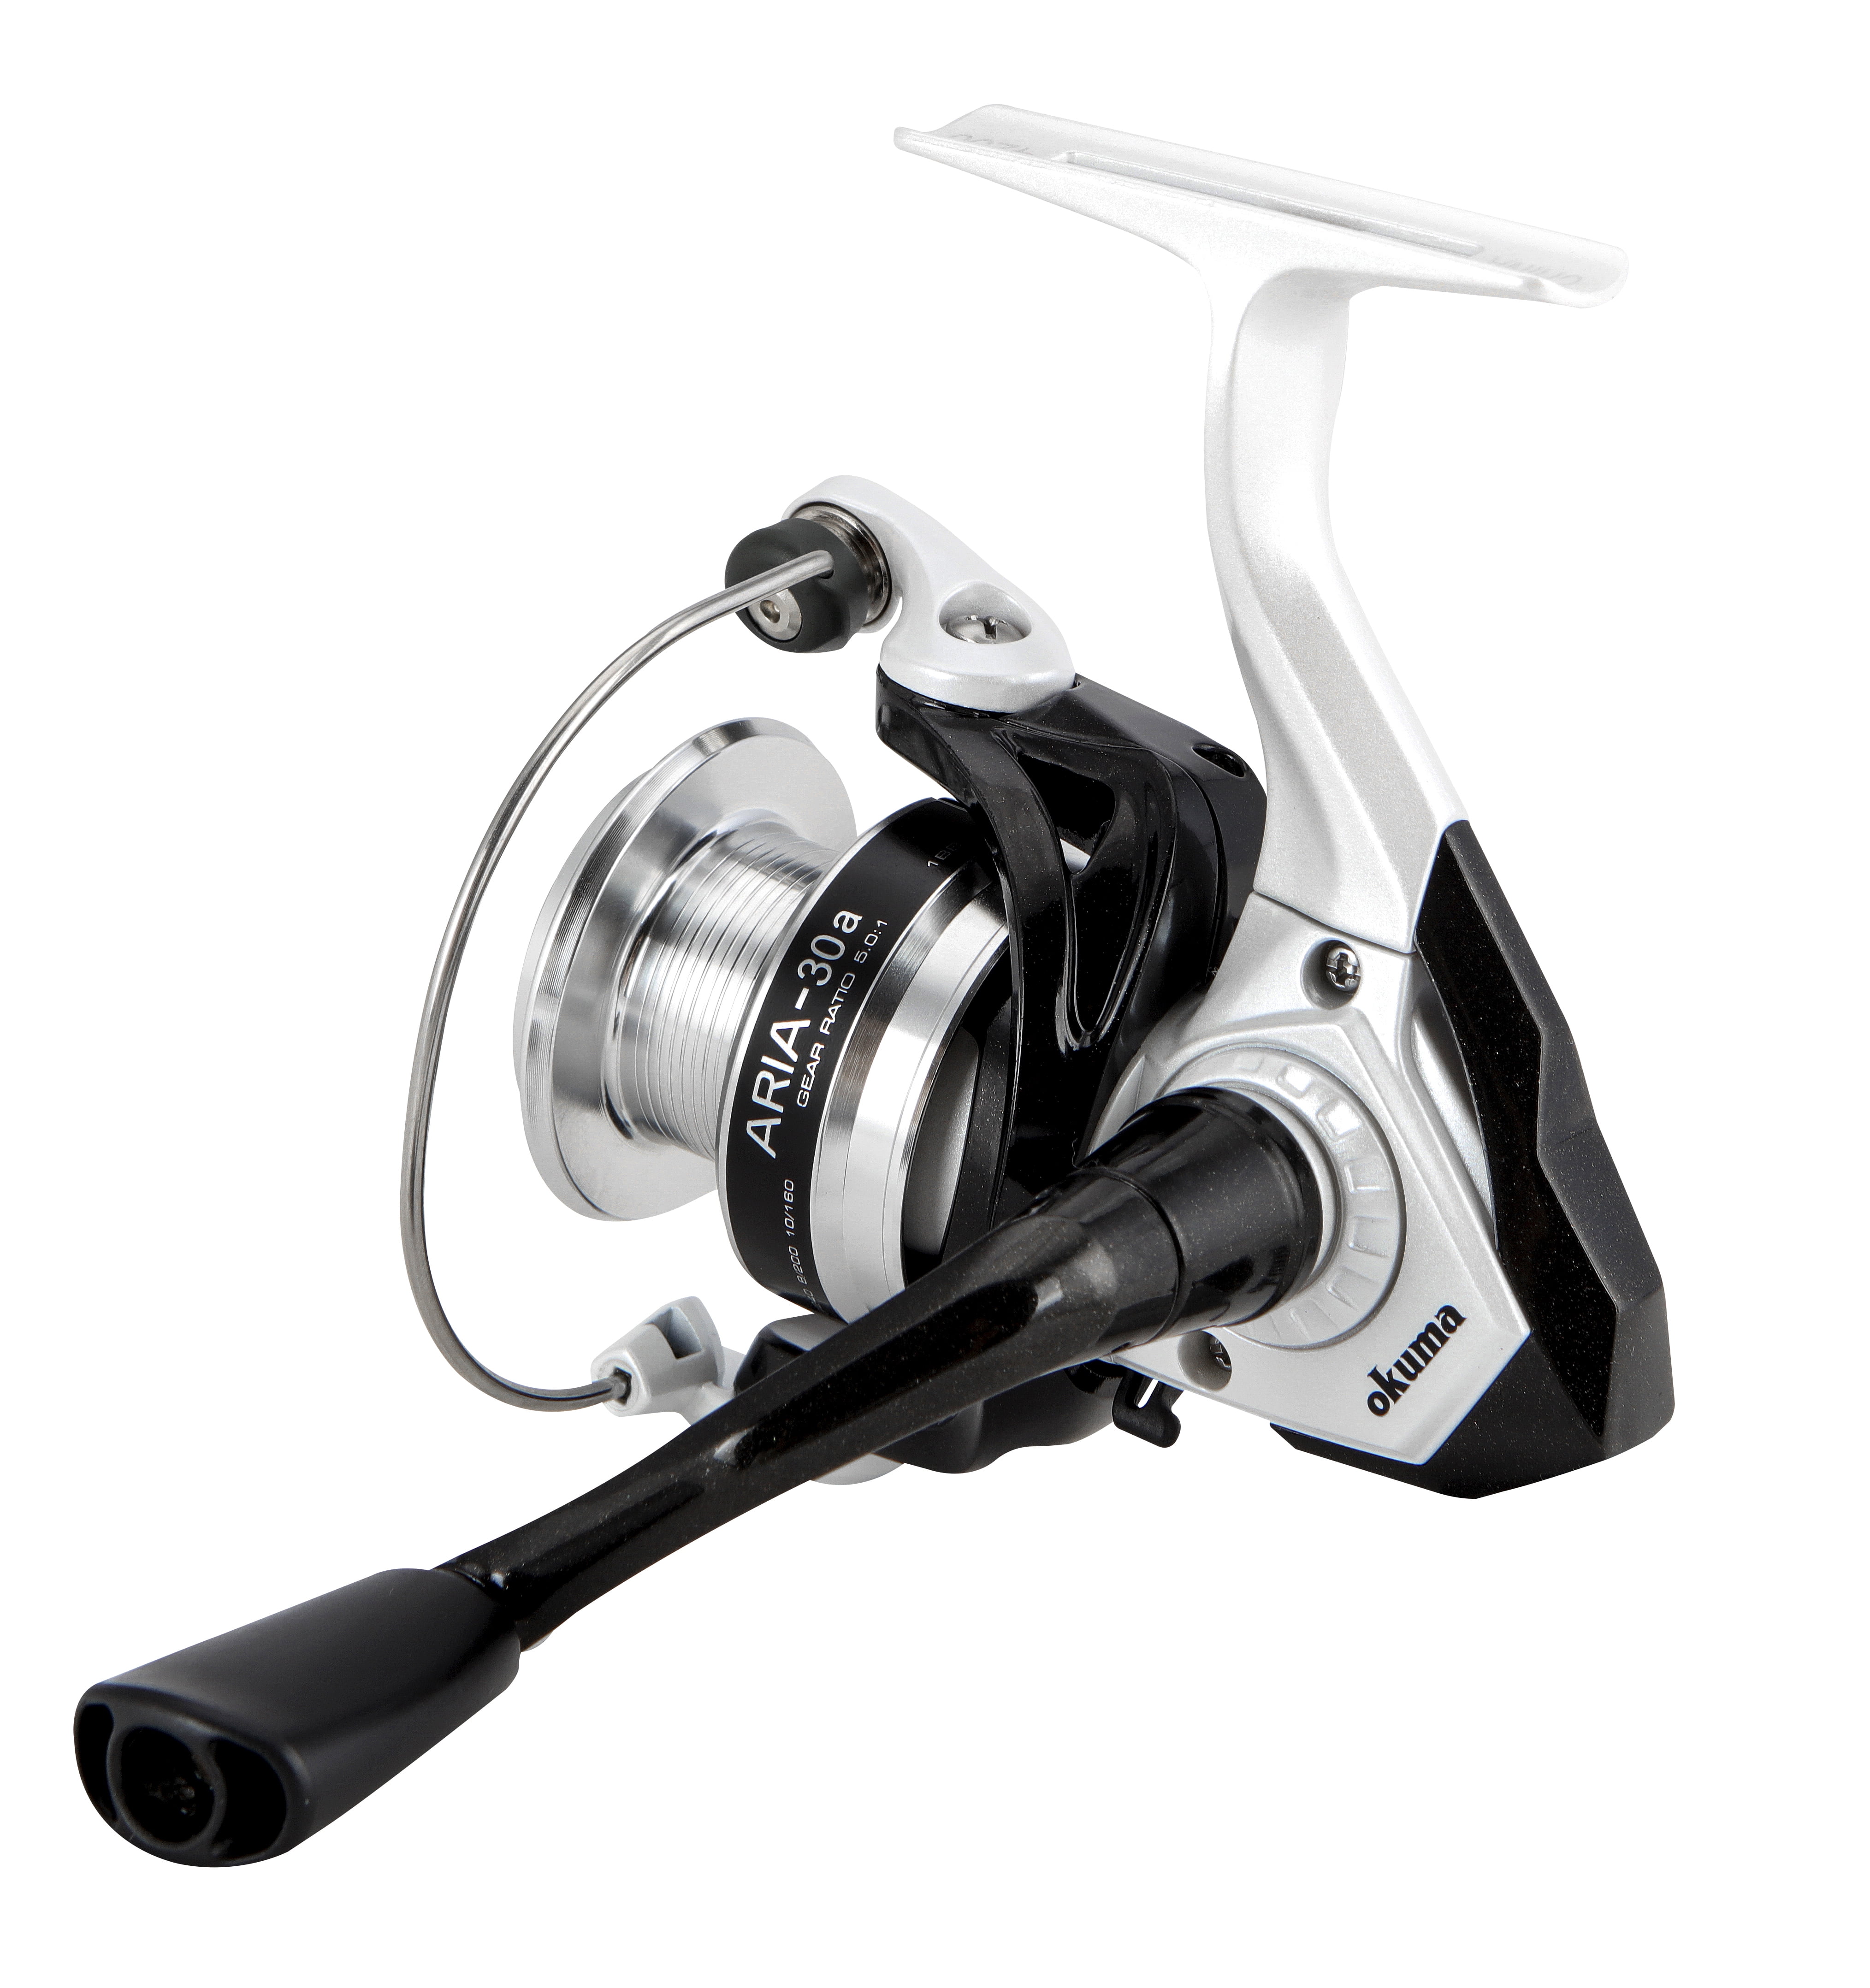 Okuma Aria a 3000a Freshwater and Saltwater Spinning Fishing Reel